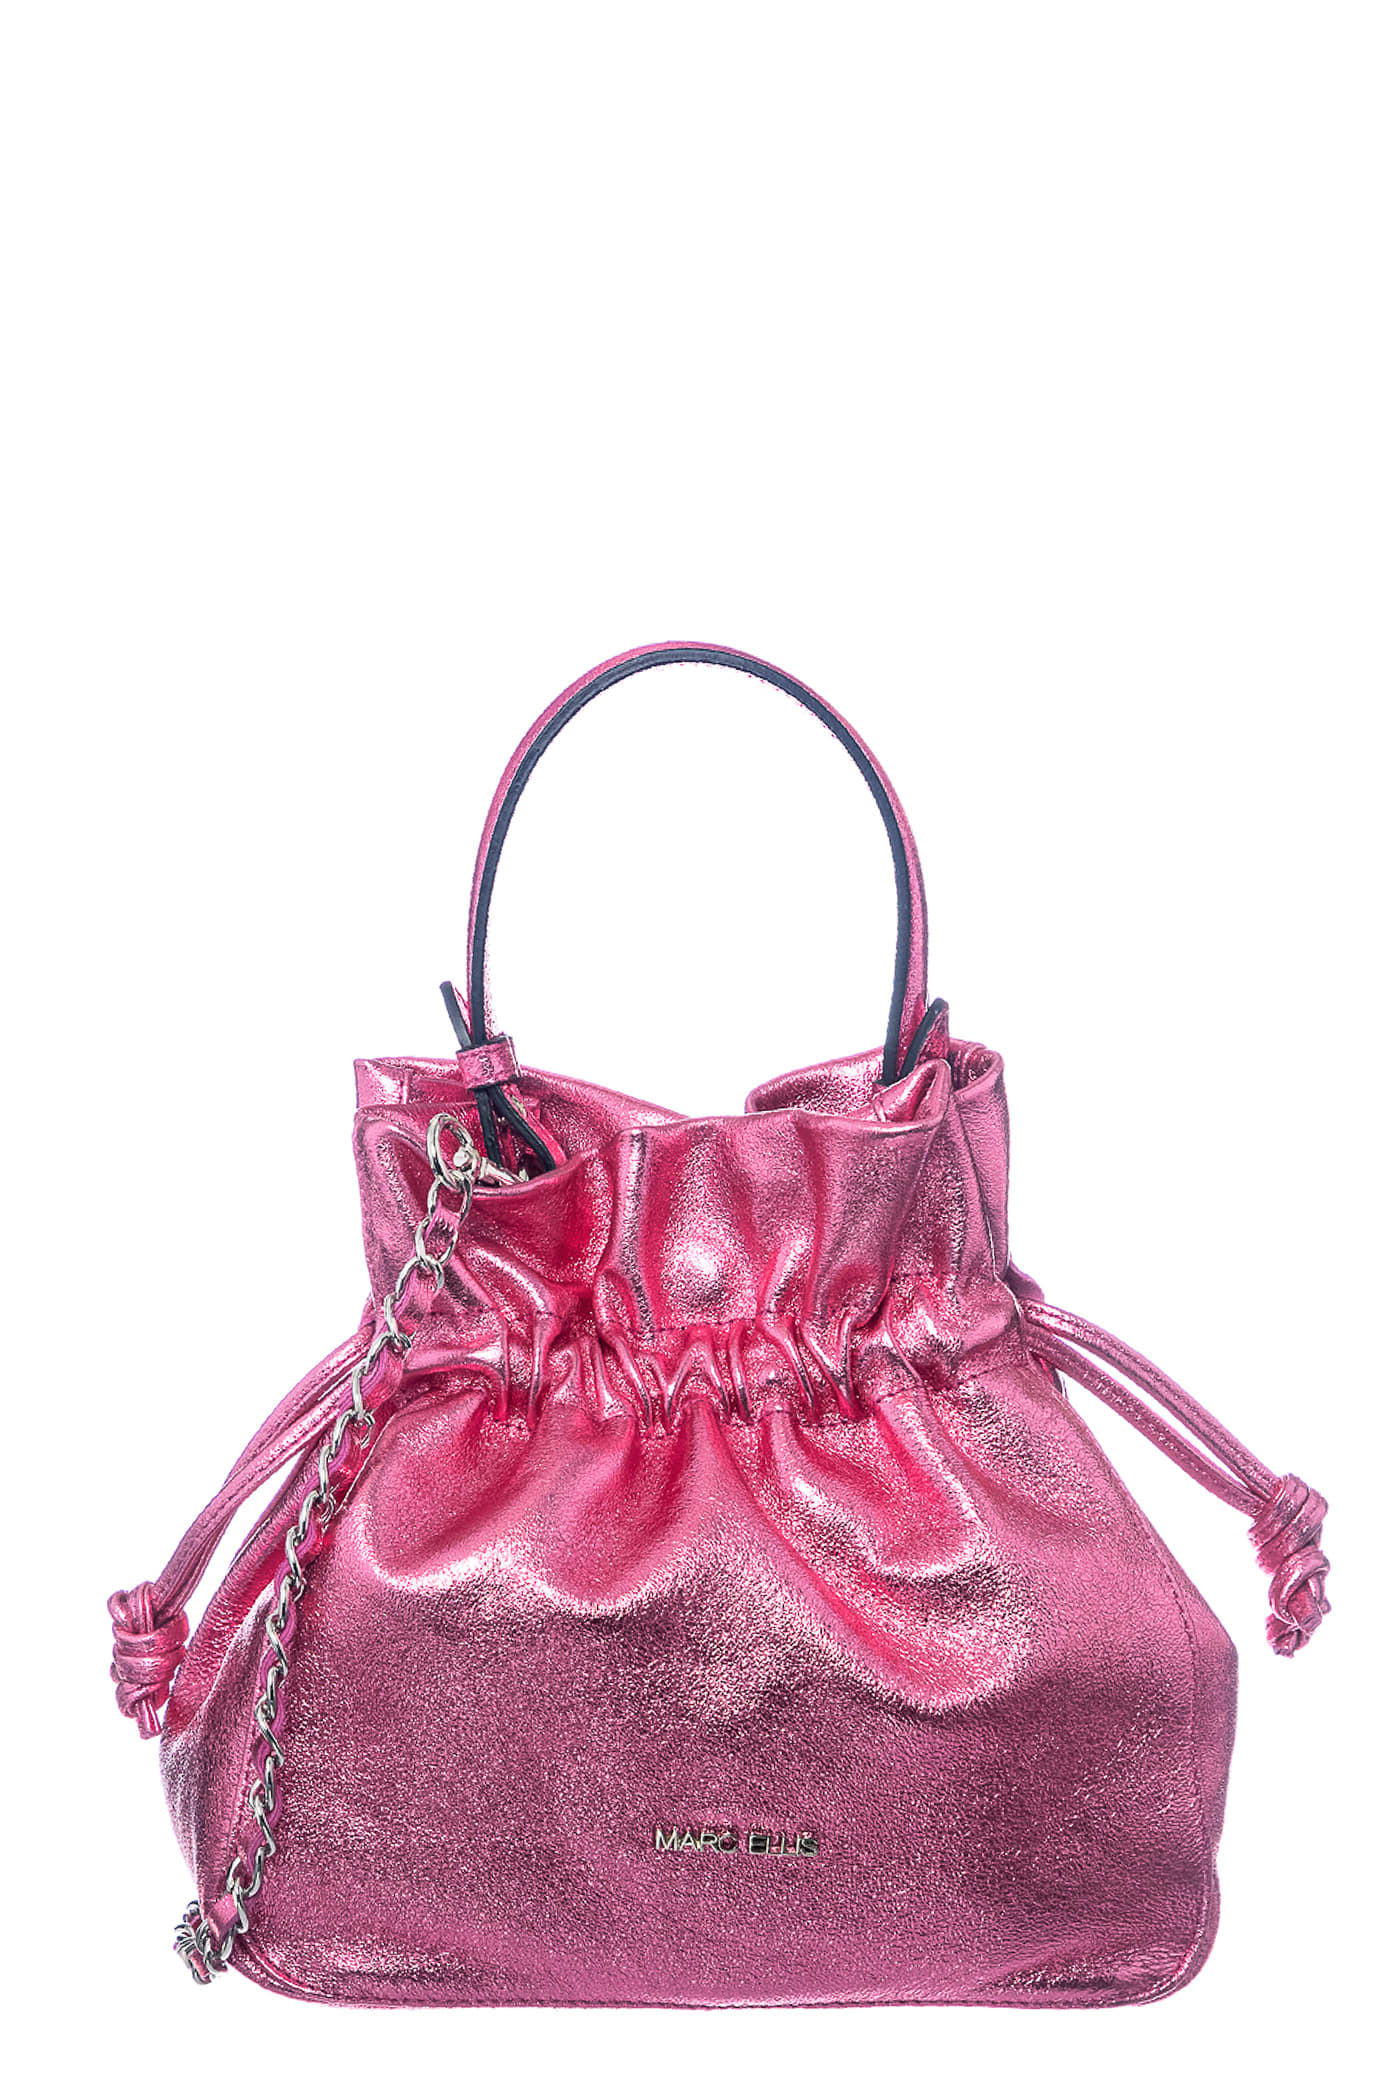 Marc Ellis Concy Piper Hand Bag In Fuxia Leather